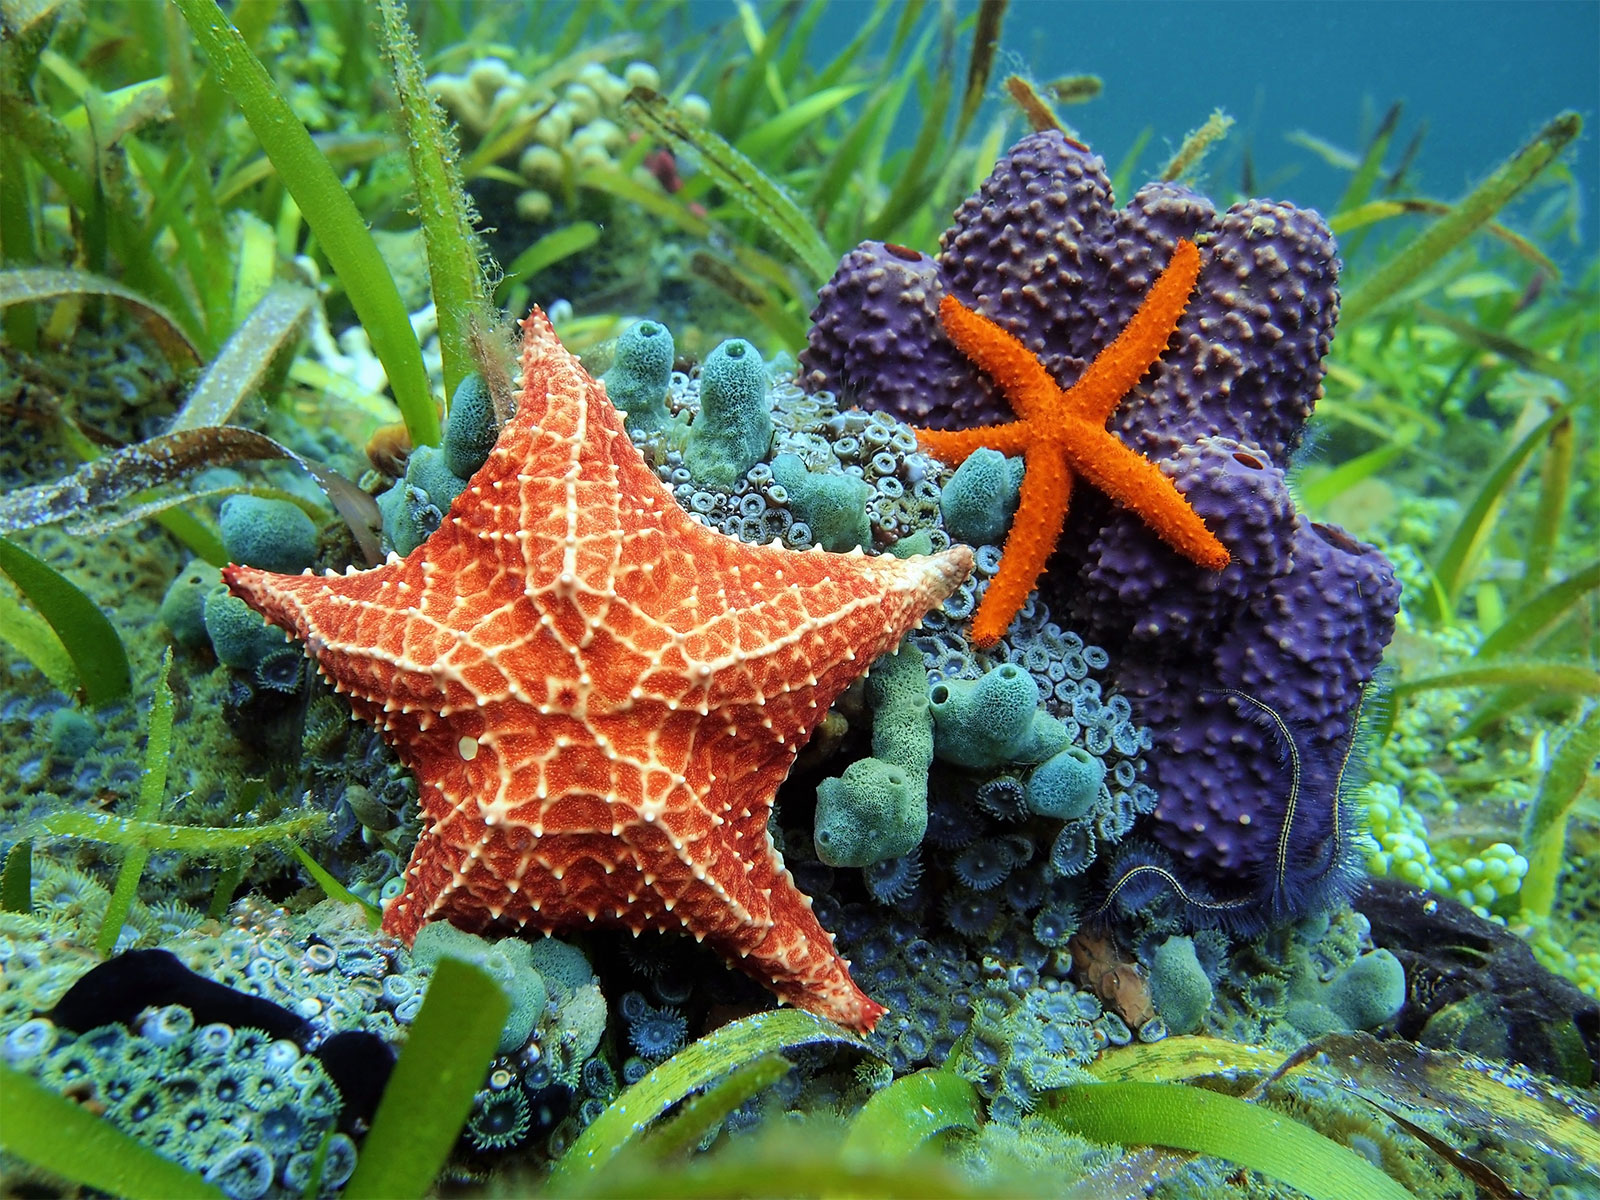 Examples of Echinoderms